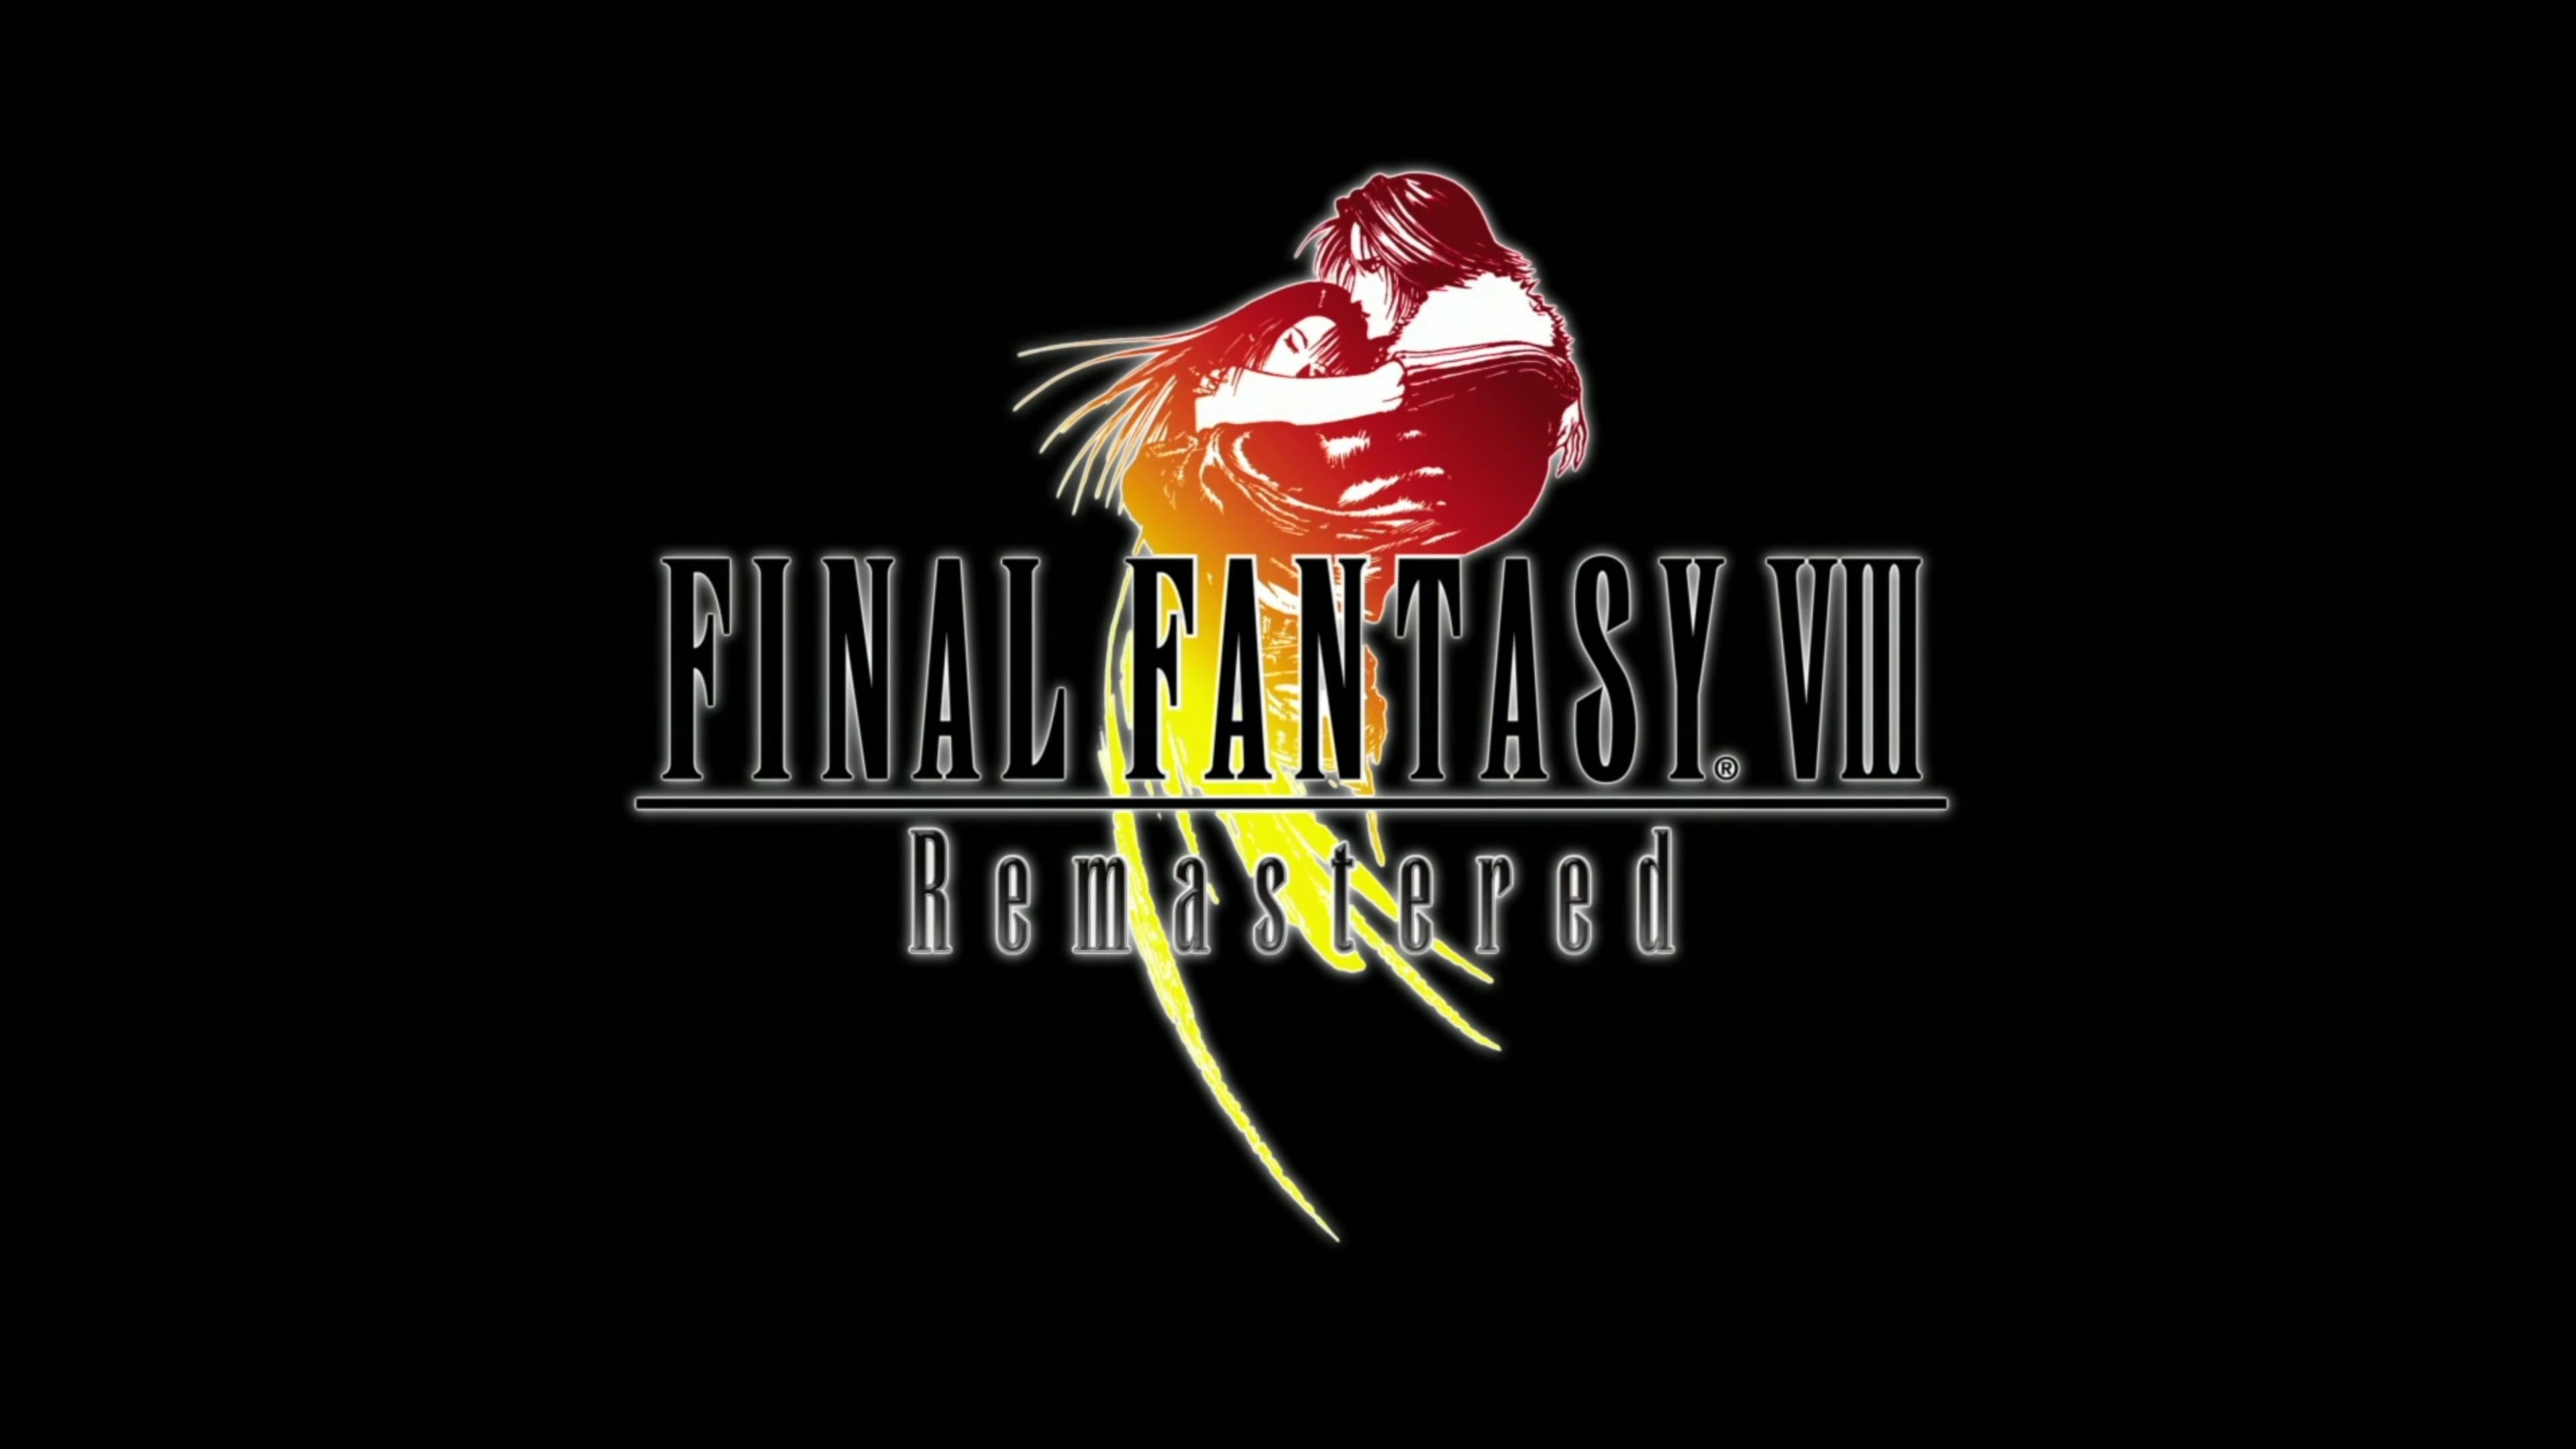 Square Enix on why it decided to remaster Final Fantasy VIII